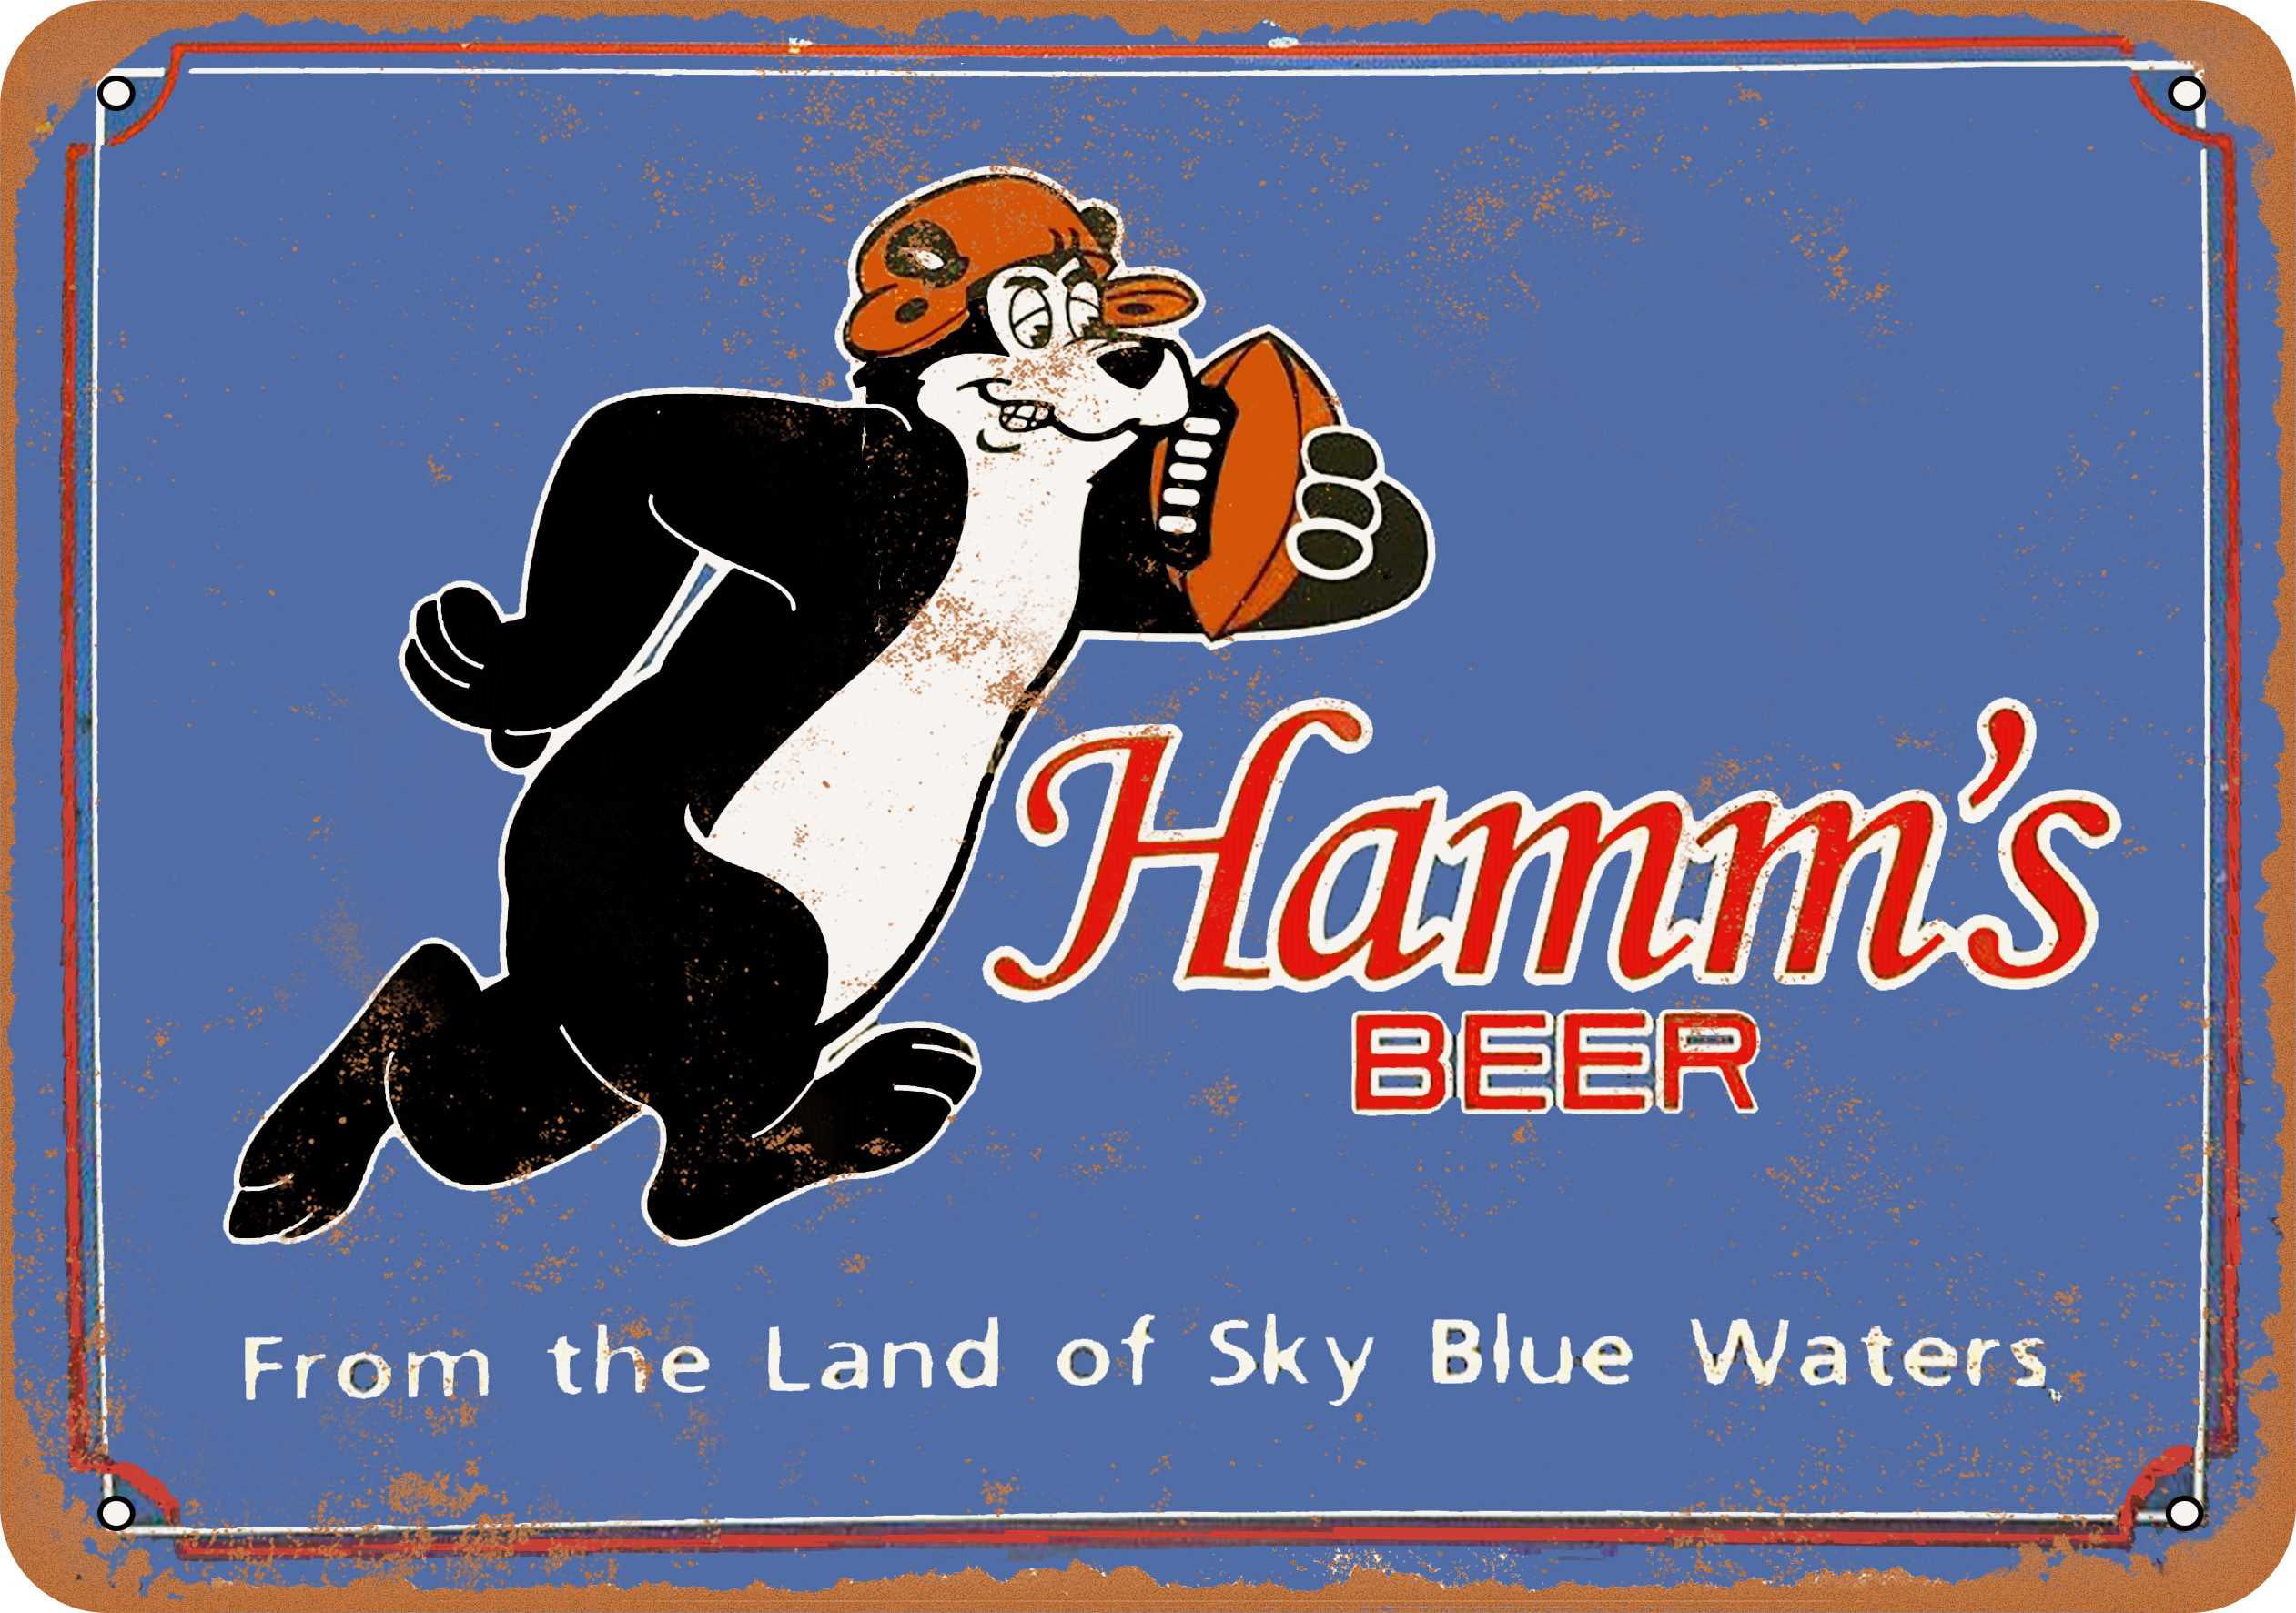 A MUST HAVE SET OF 2 HAMM'S BEER HAMM'S BEAR 8X10 ALUMINUM SIGN FREE SHIPPING! 